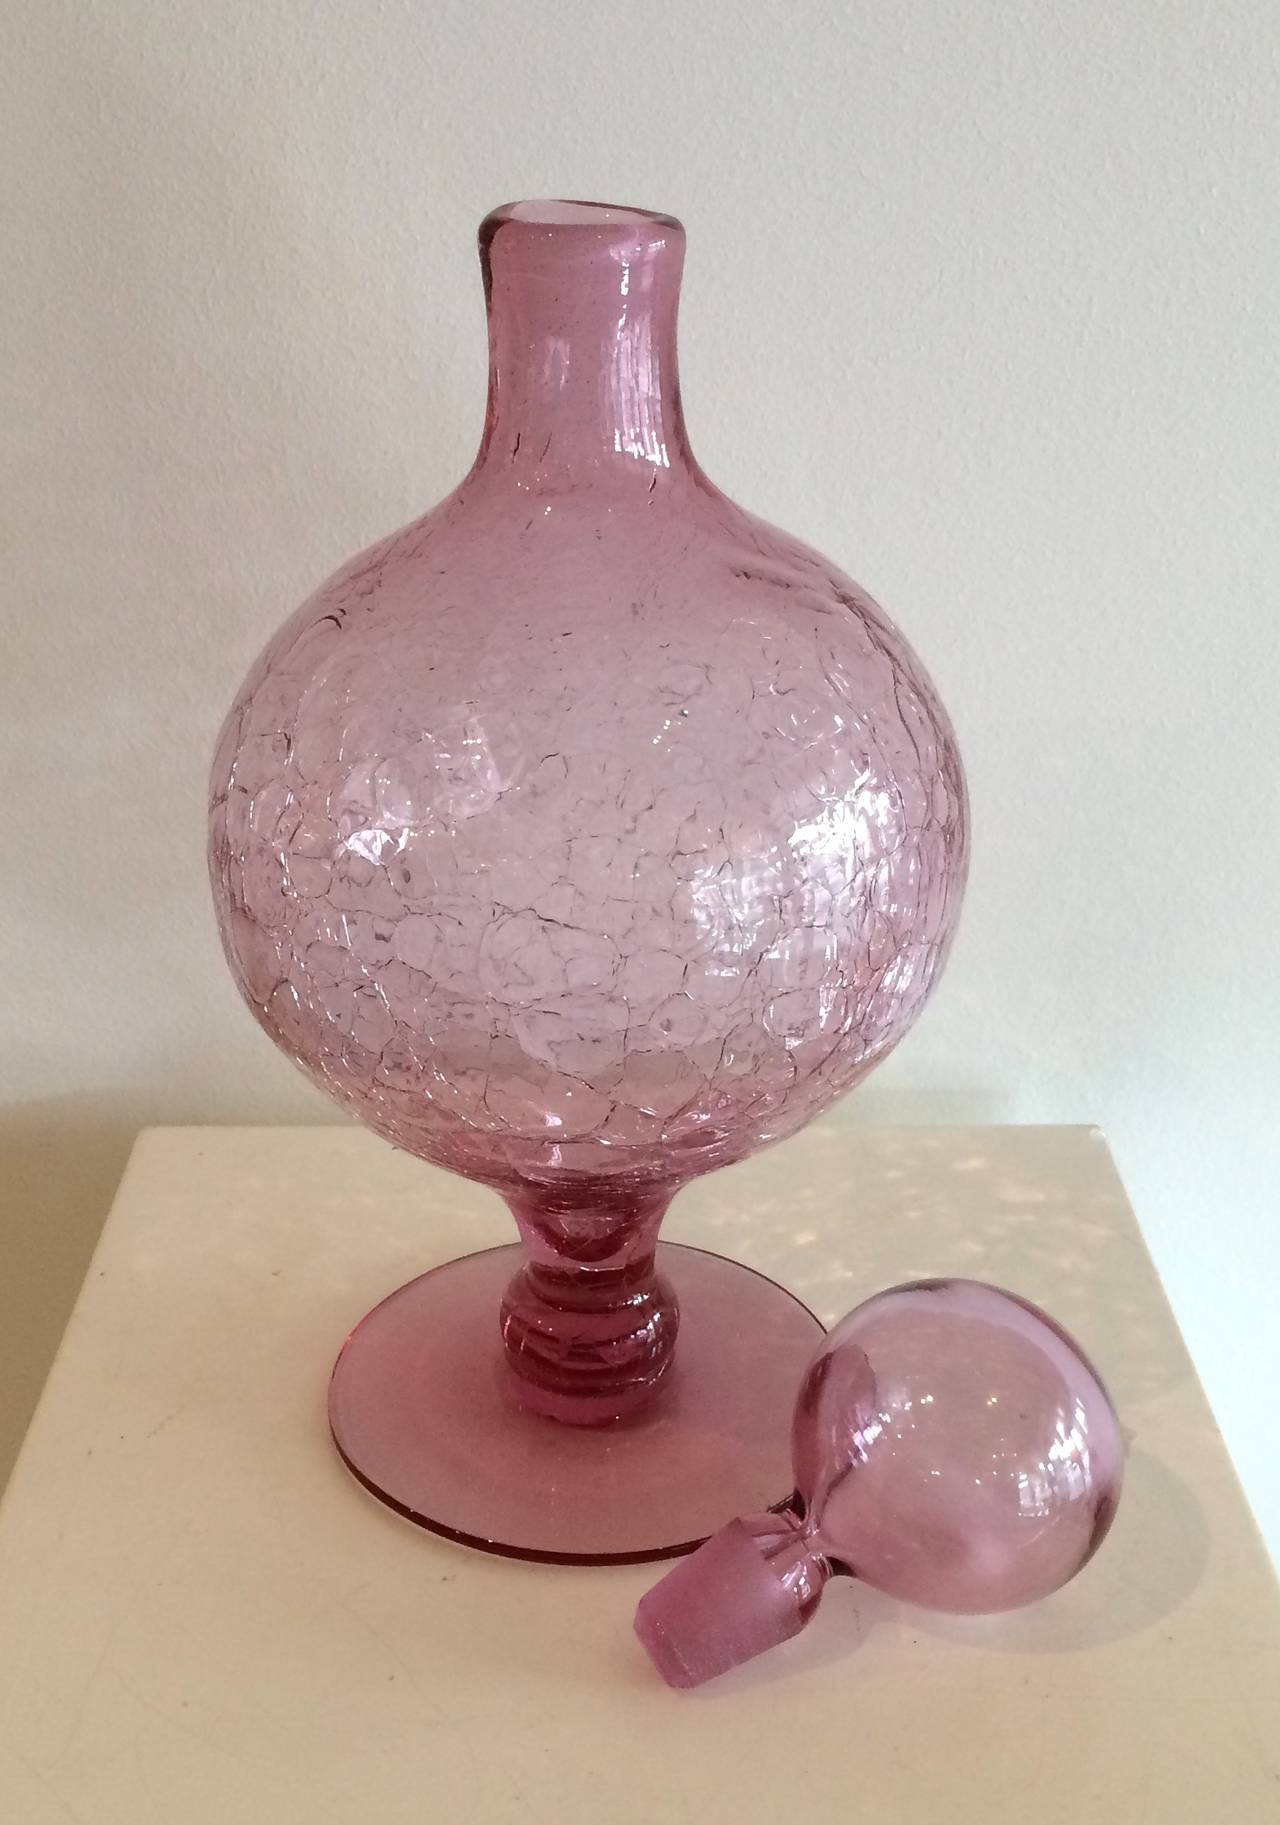 Light rose colored crackled glass decanter with round body and stopper.